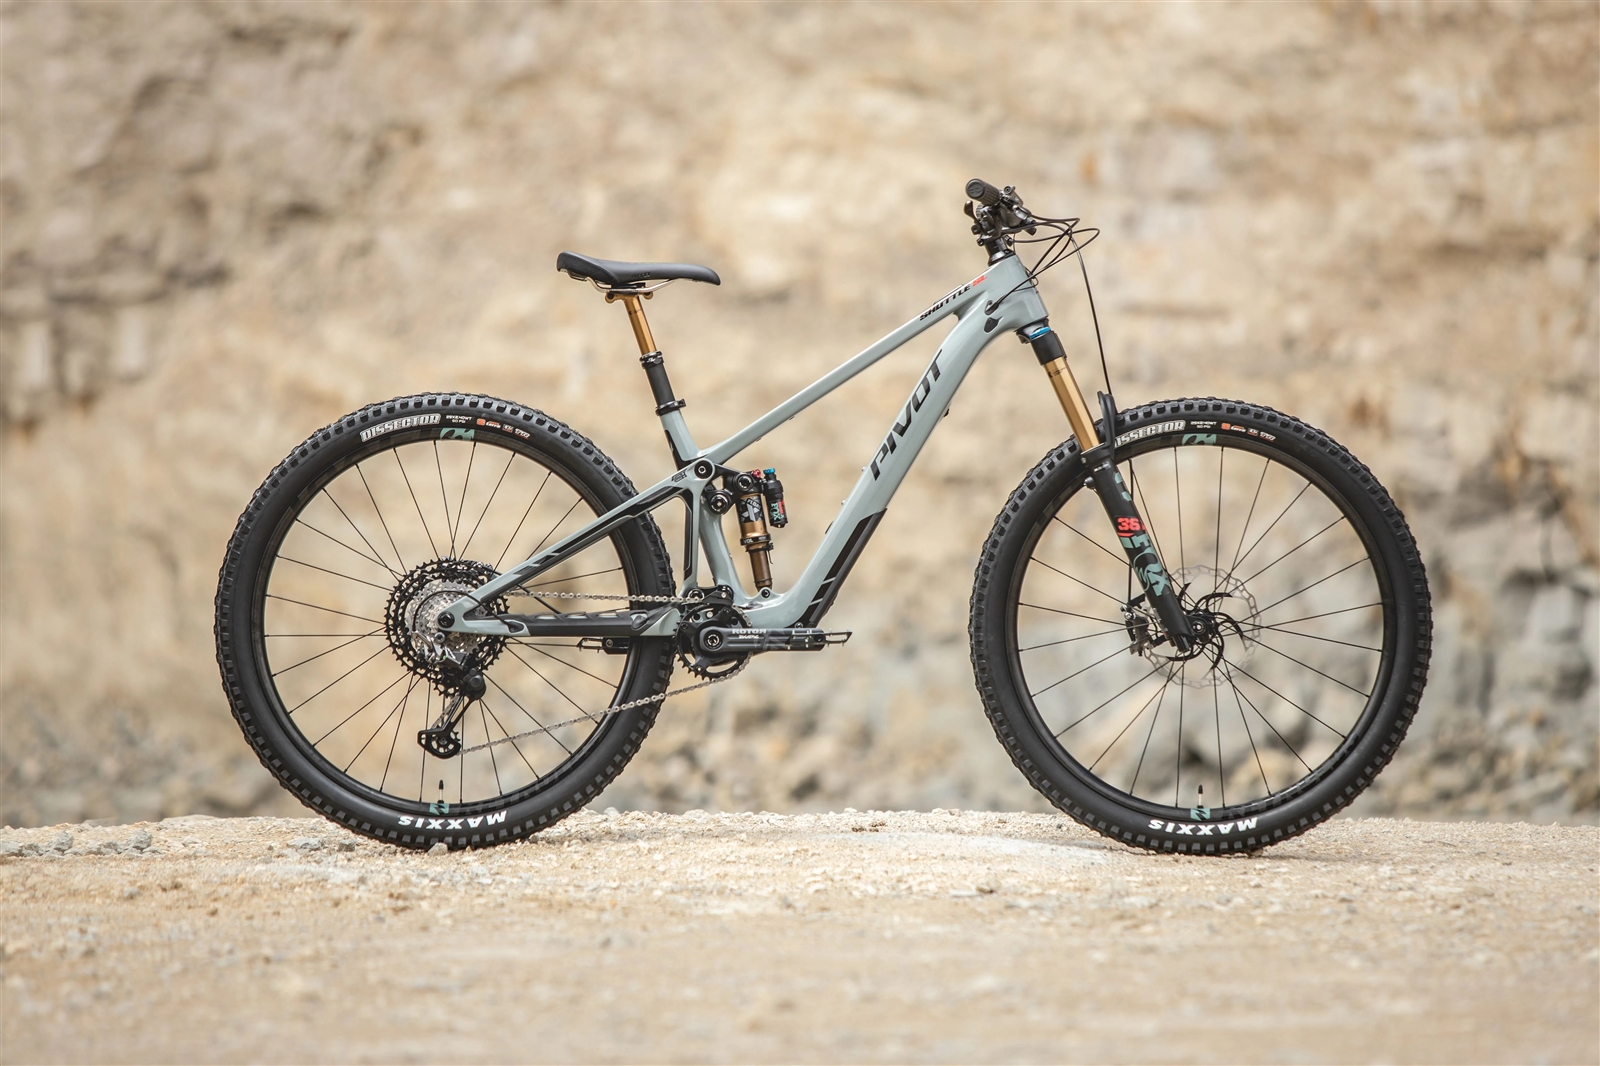 The new Pivot Shuttle SL is available on Ridewill